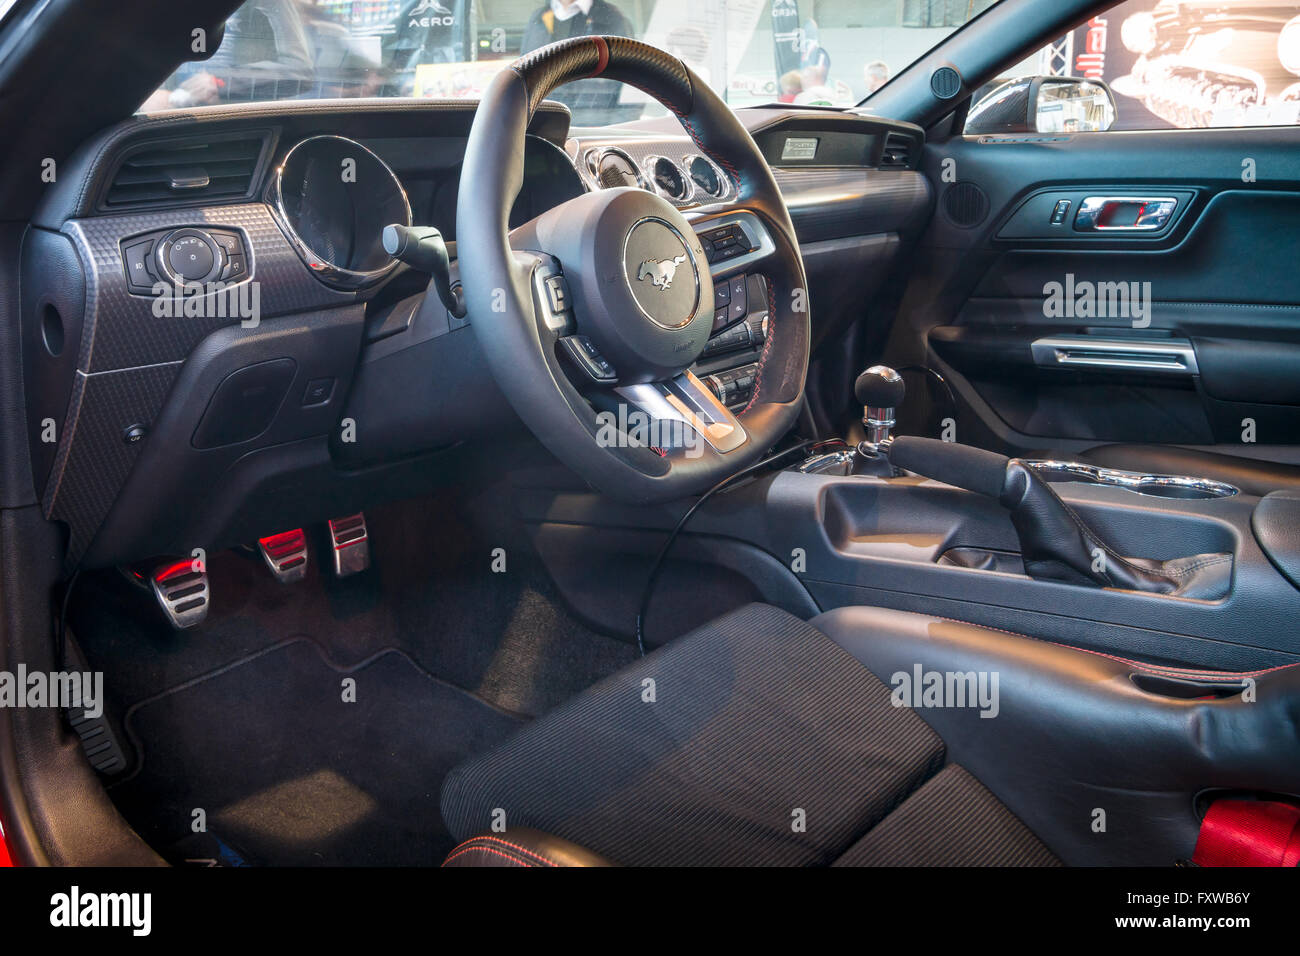 Page 2 - Steering Wheel Ford Mustang High Resolution Stock Photography and  Images - Alamy